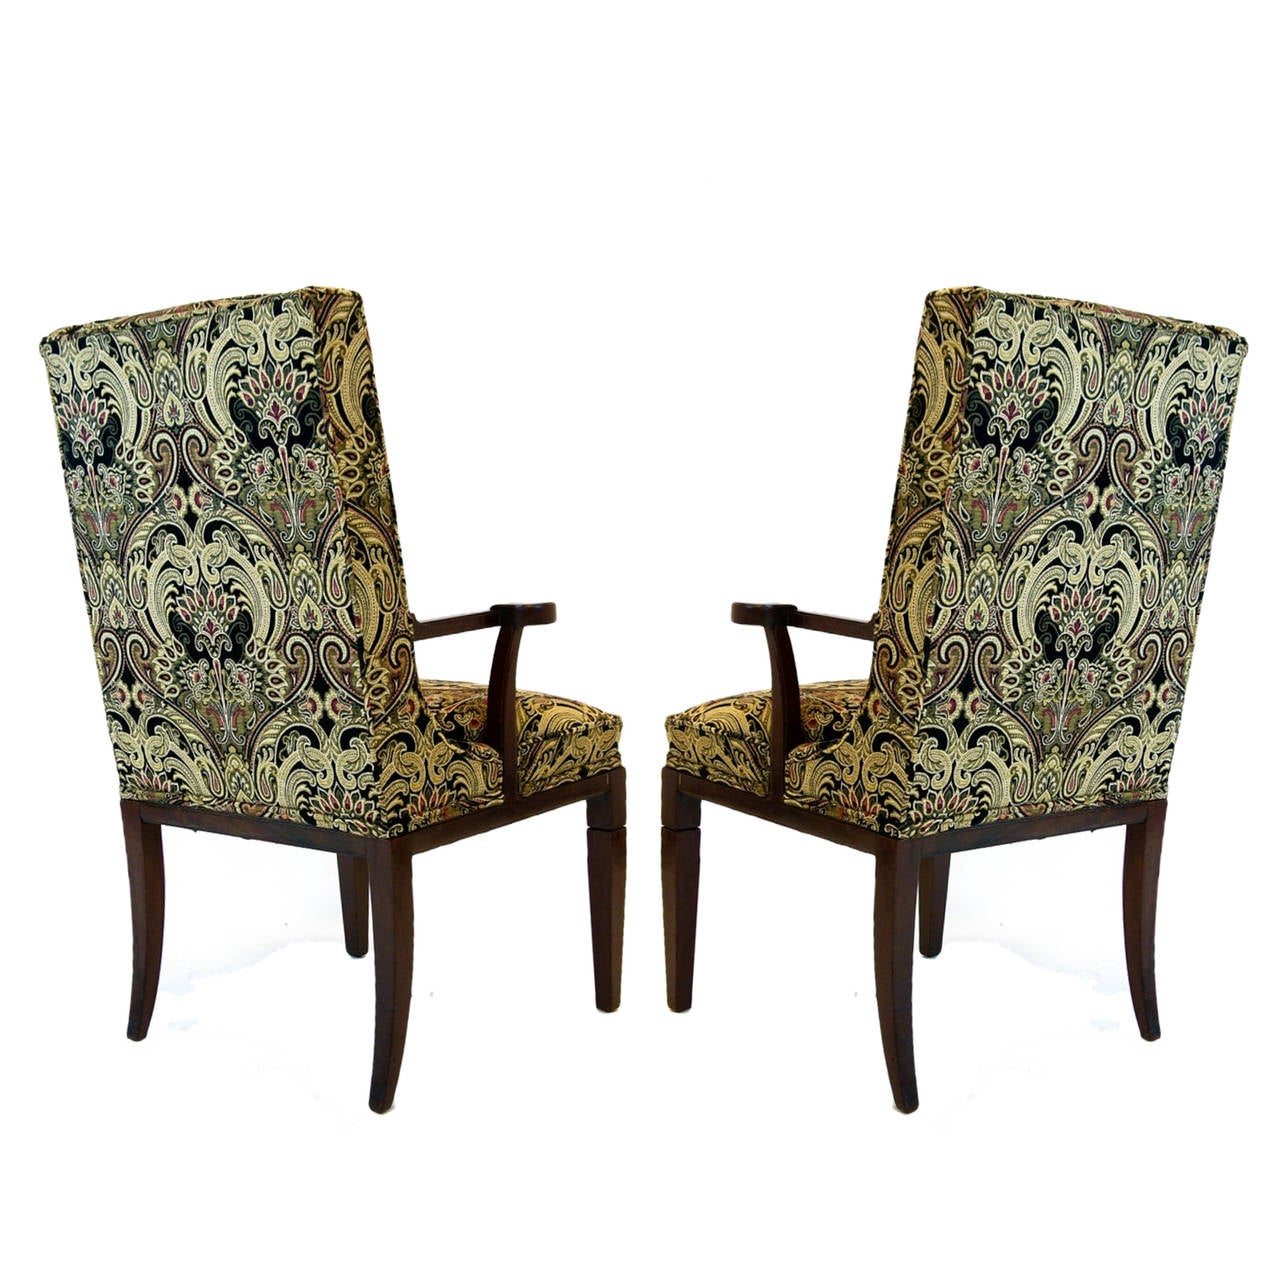 20th Century Pair of Tommi Parzinger Chairs with Tapestry Upholstery for Charak